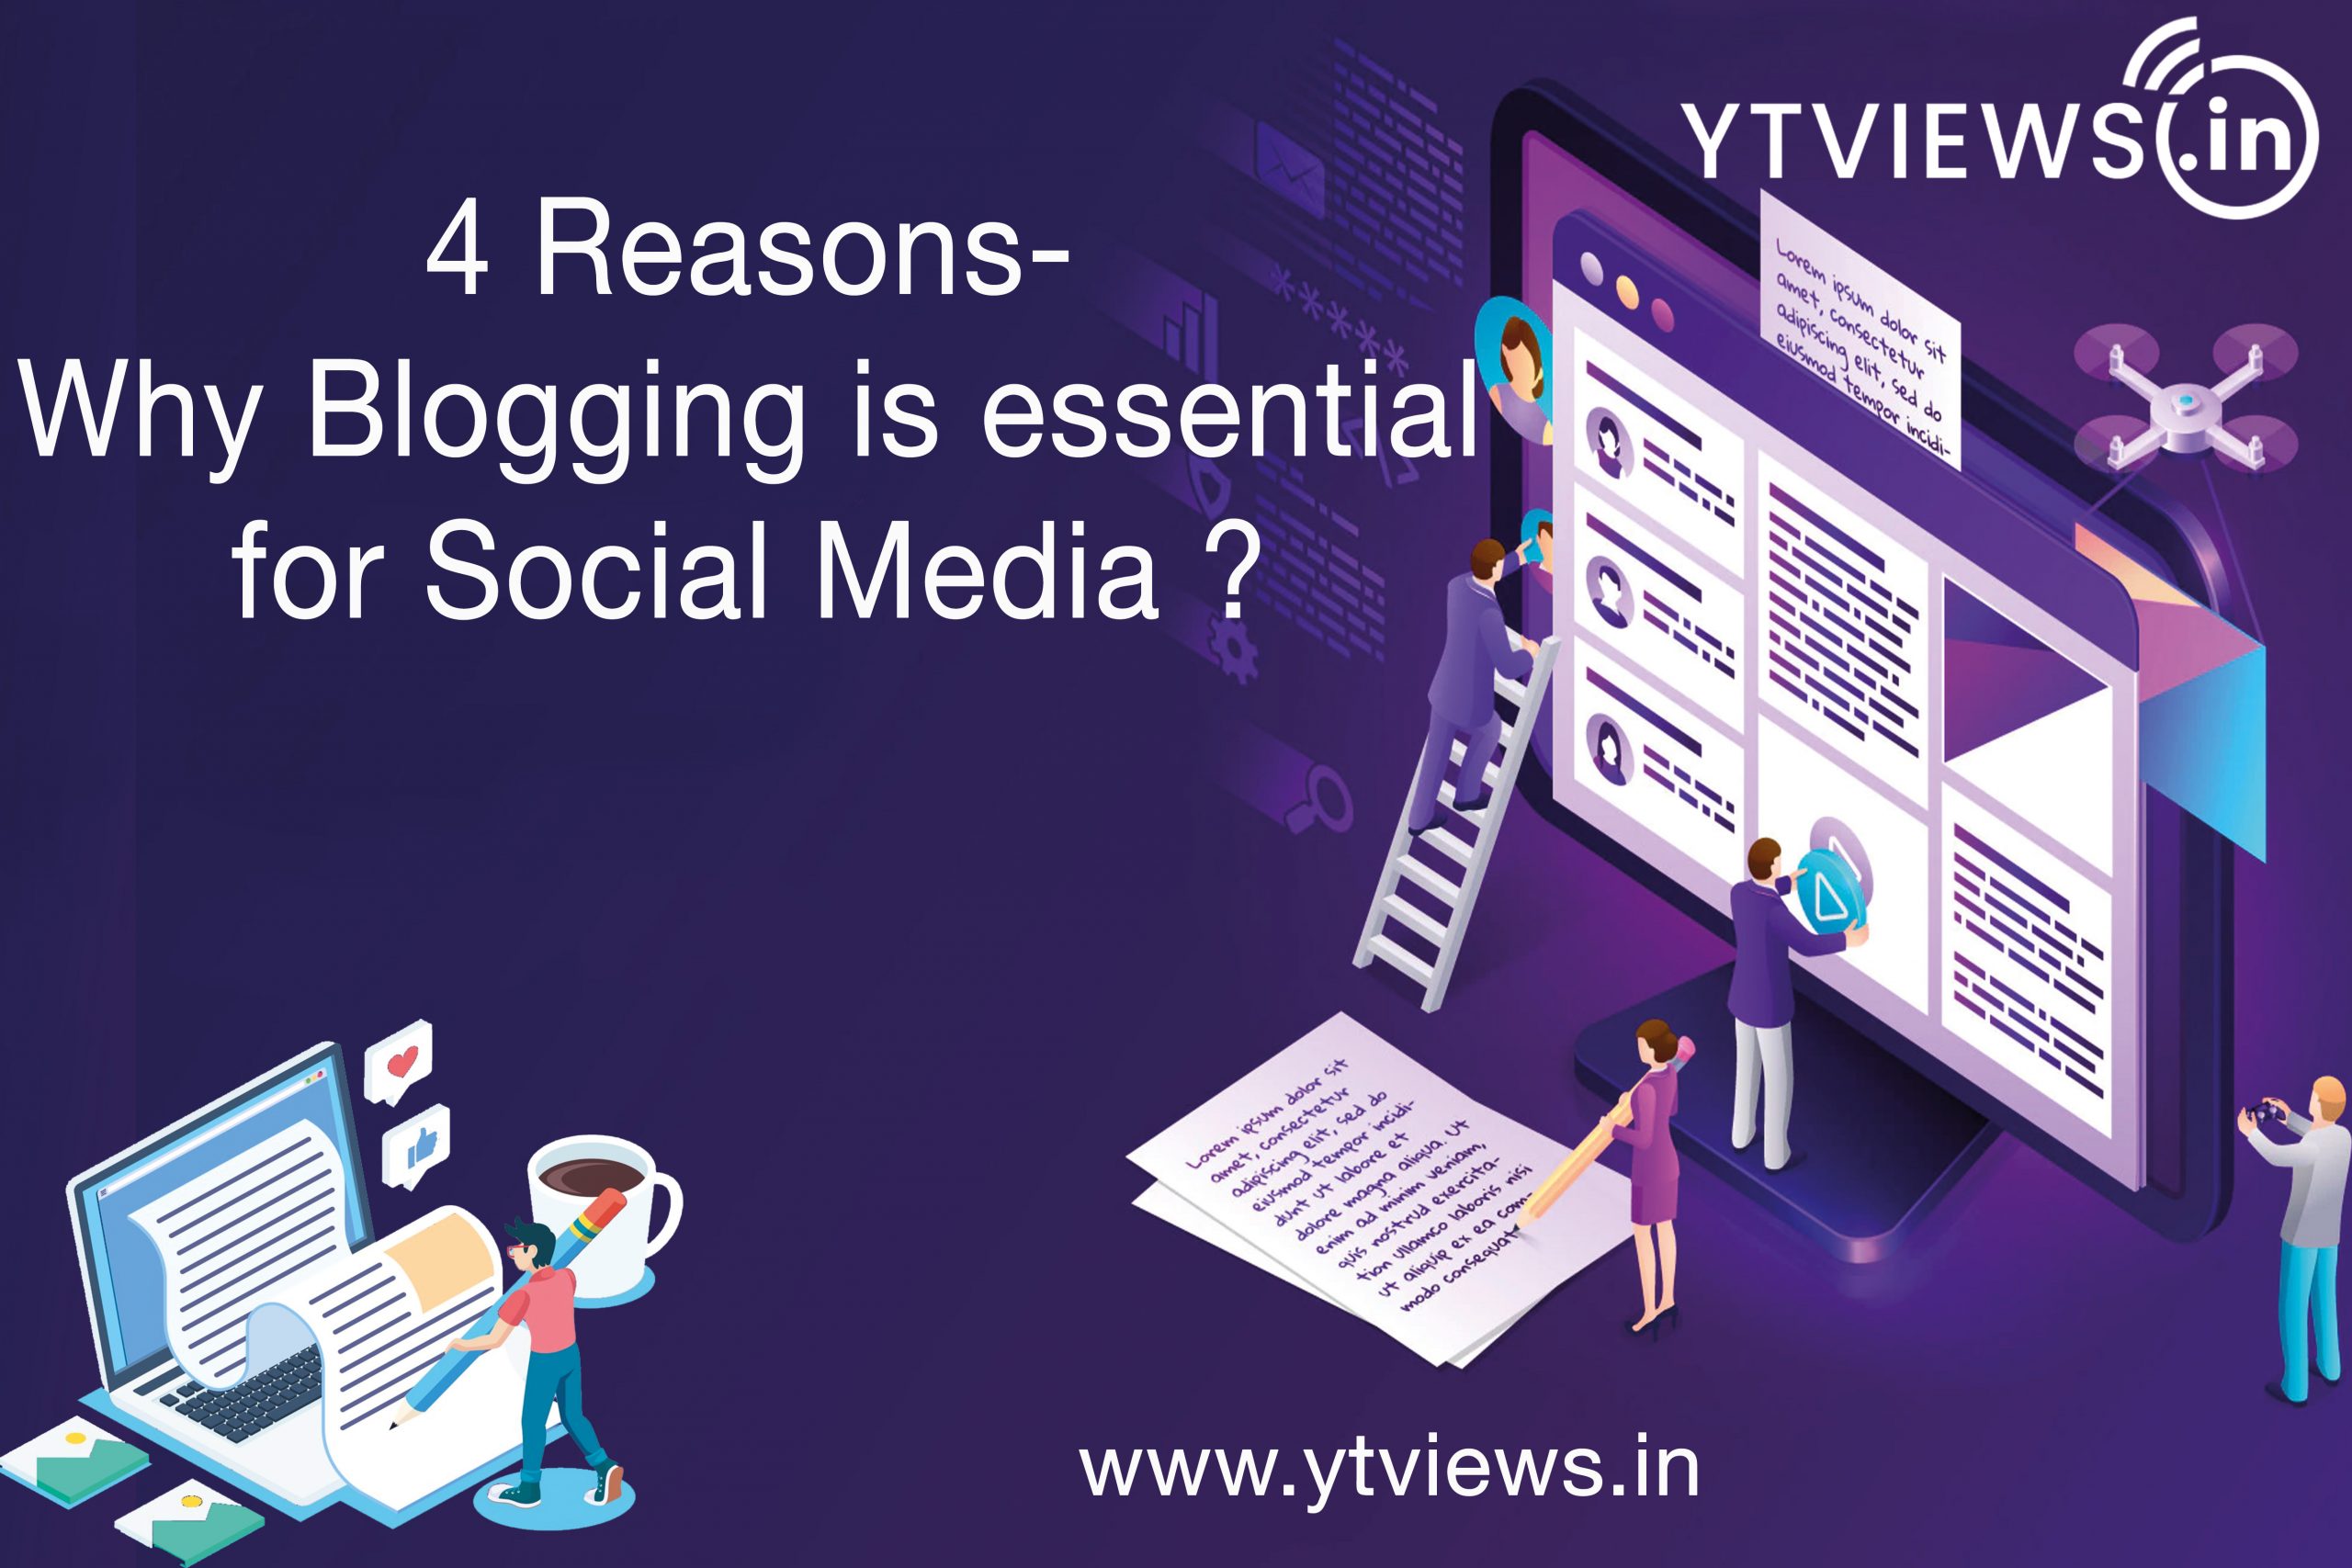 4 Reasons Why Blogging is Essential for Social Media